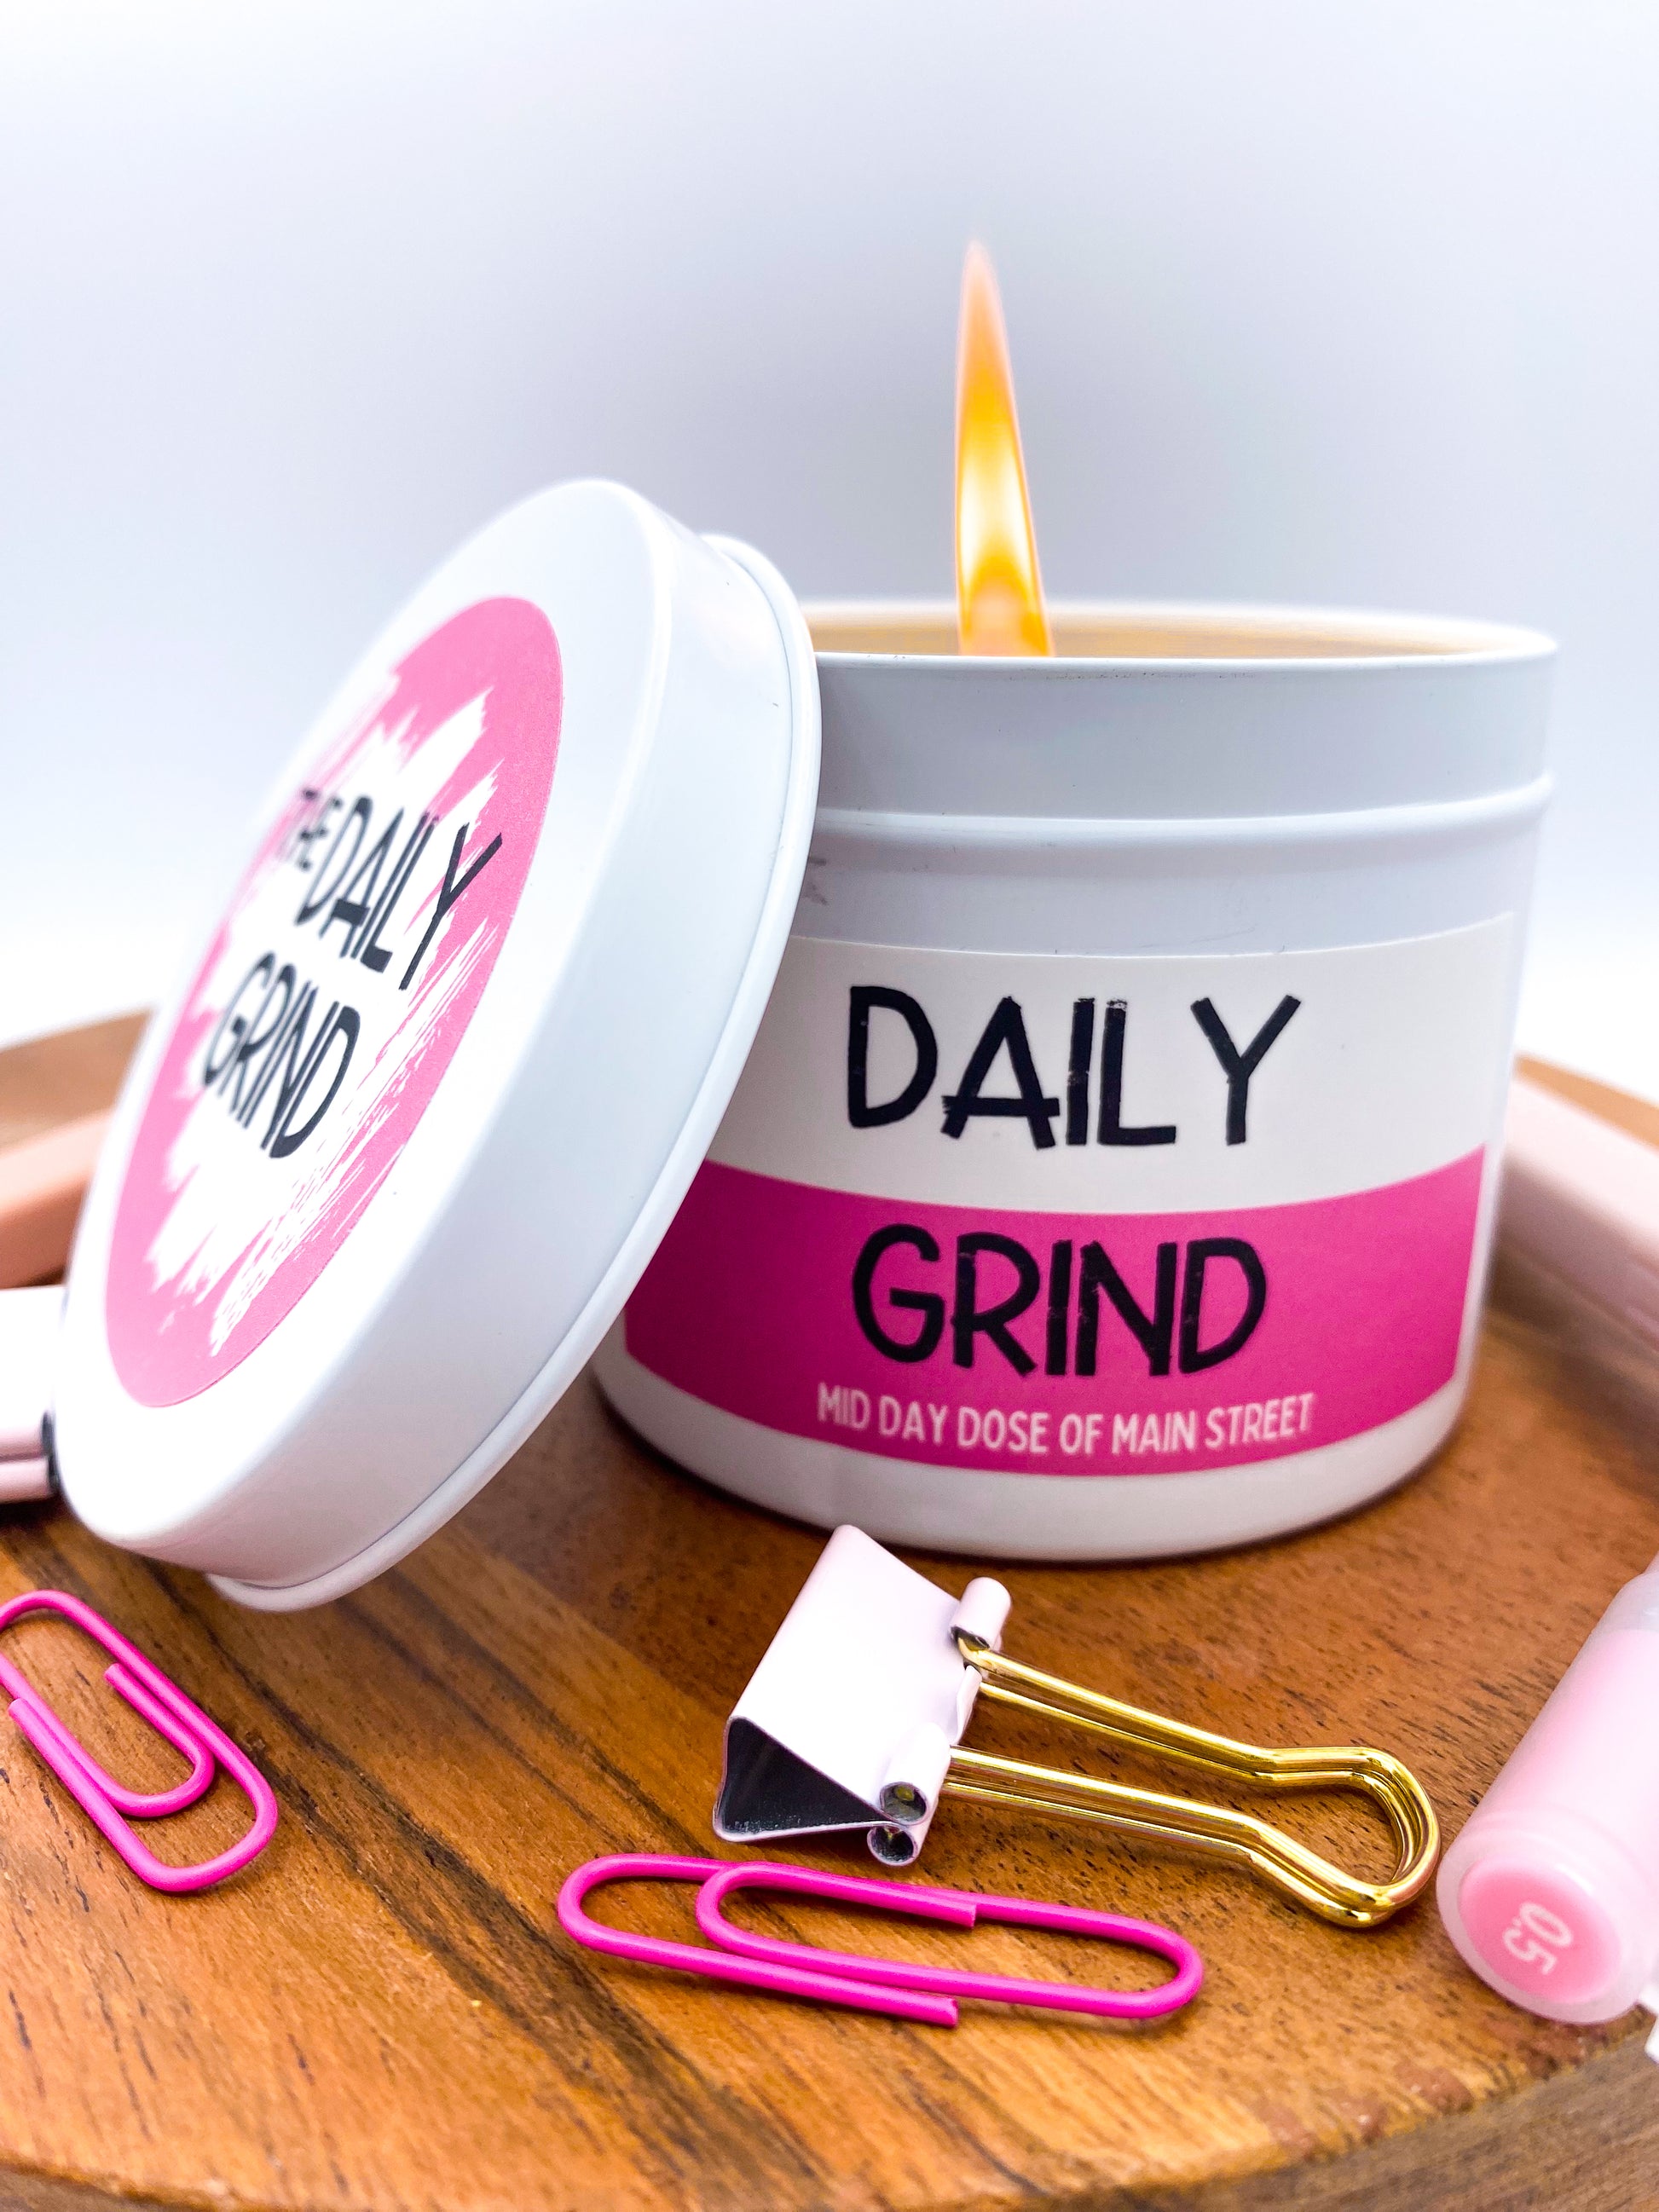 Lit "Daily Grind" candle in white tin